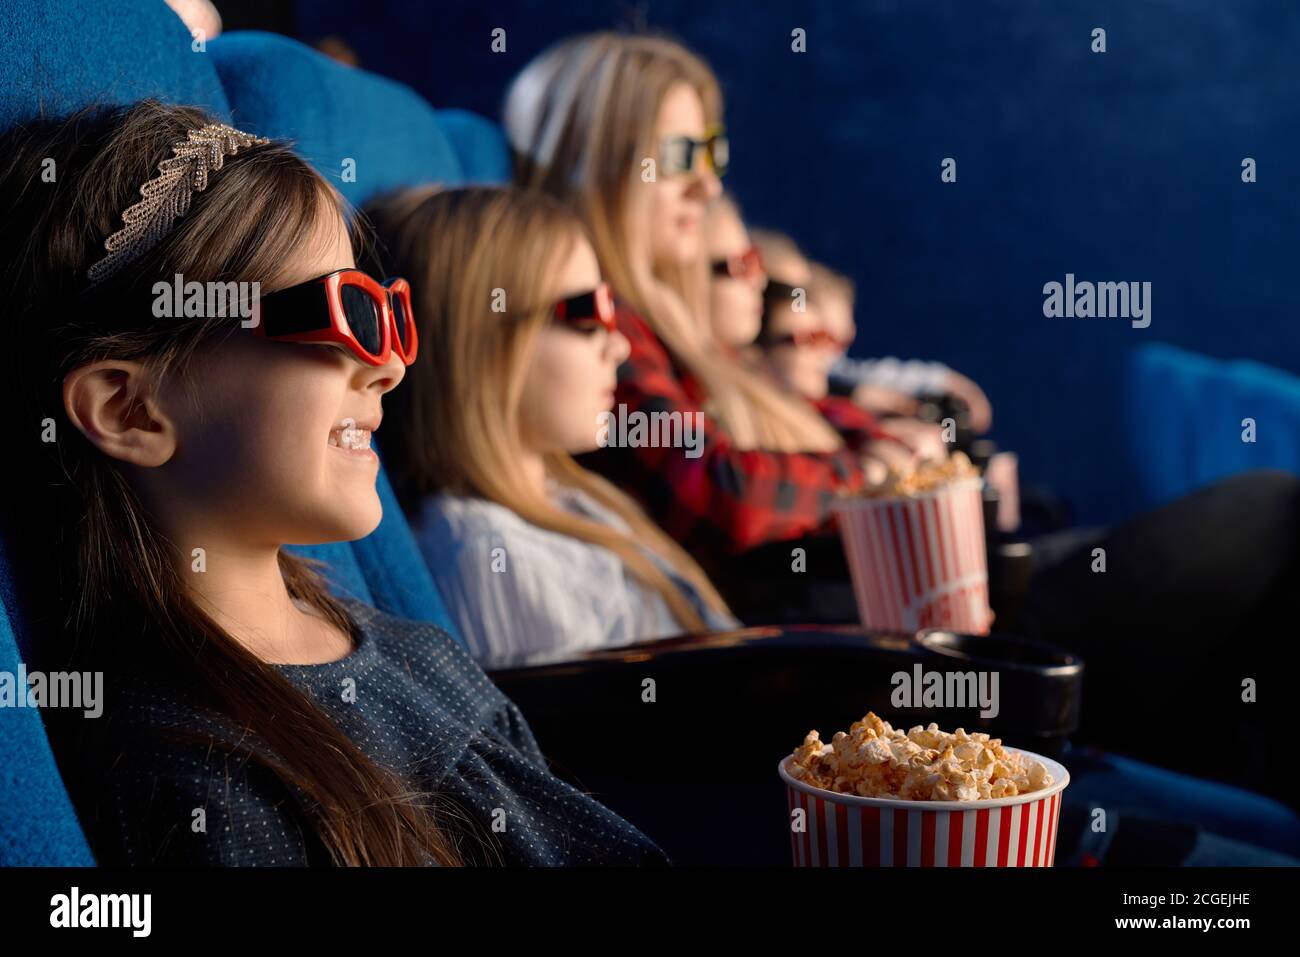 Selective focus of laughing child wearing 3d glasses, eating popcorn and watching funny movie. Cute little girl enjoying time with friends in cinema. Concept of leisure and entertainment. Stock Photo